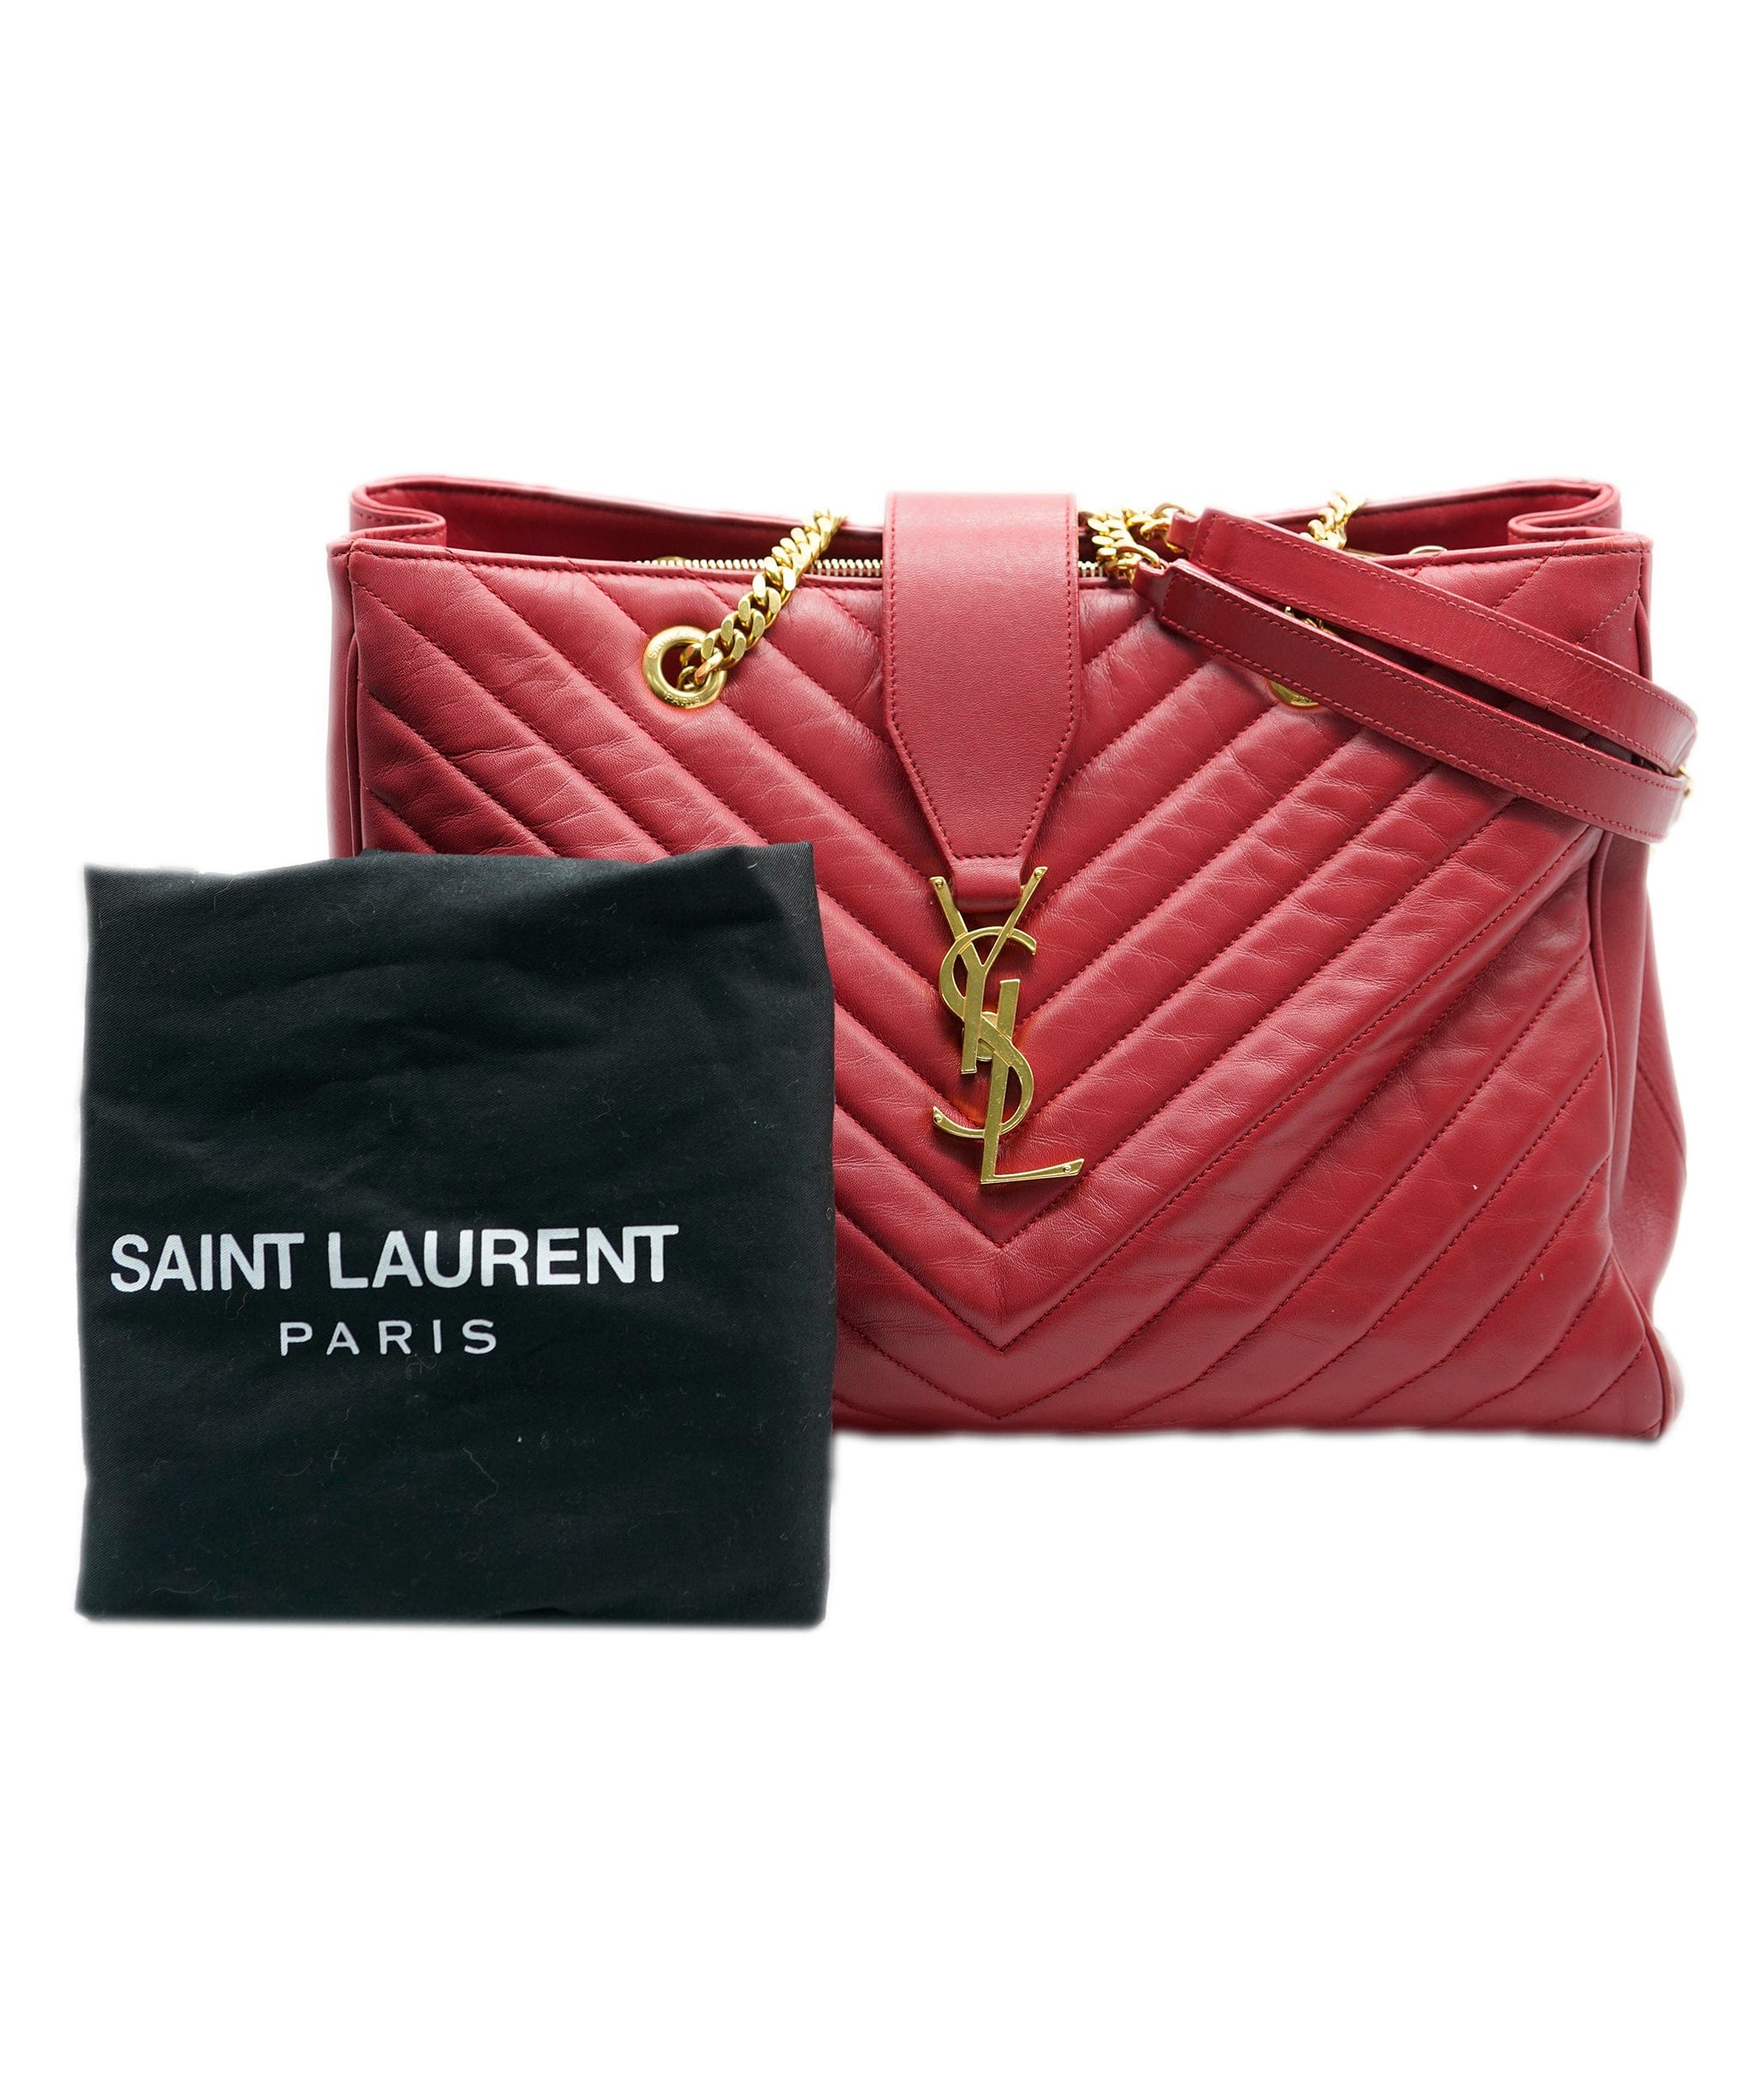 Yves Saint Laurent YSL red chevron tote with GHW - AJC0495